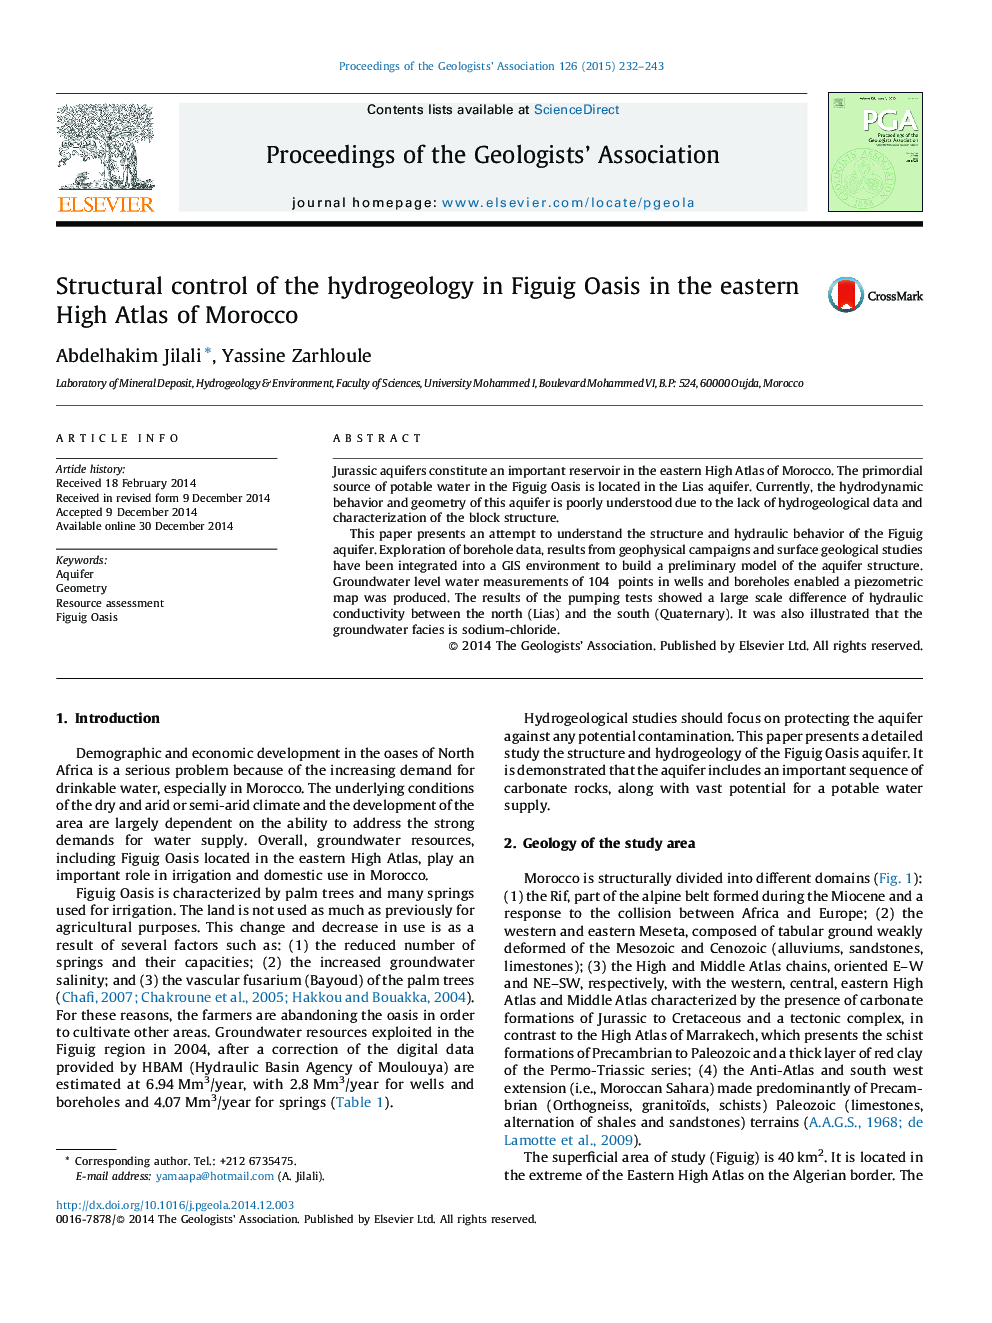 Structural control of the hydrogeology in Figuig Oasis in the eastern High Atlas of Morocco